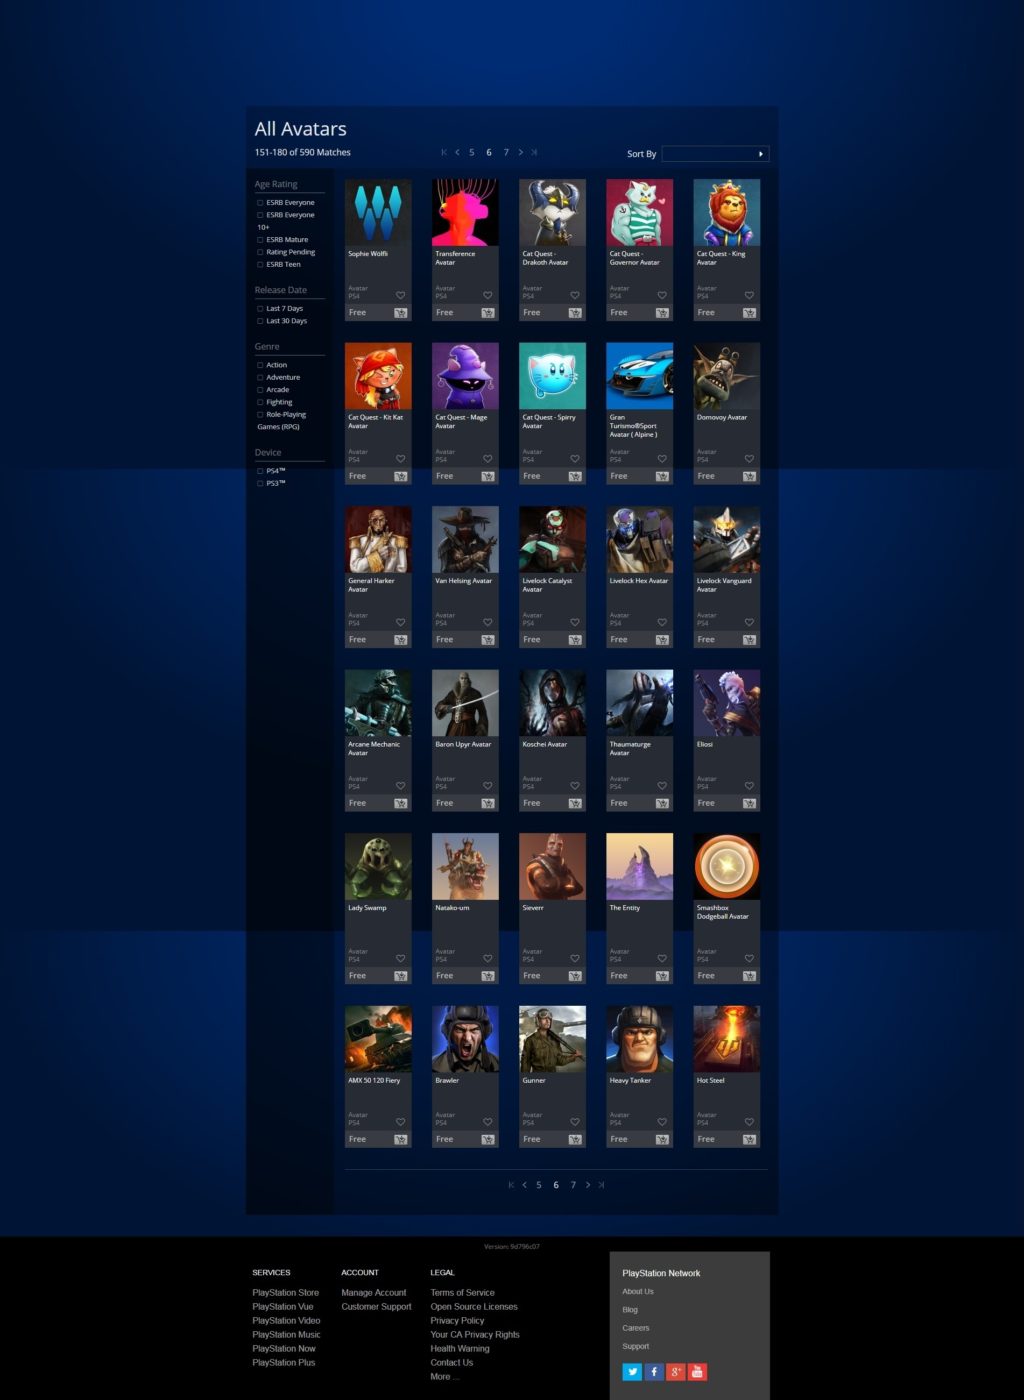 Entretener Óxido perecer Here's the Complete 20-Page List of Free PS4 Avatars and How to Get Them All